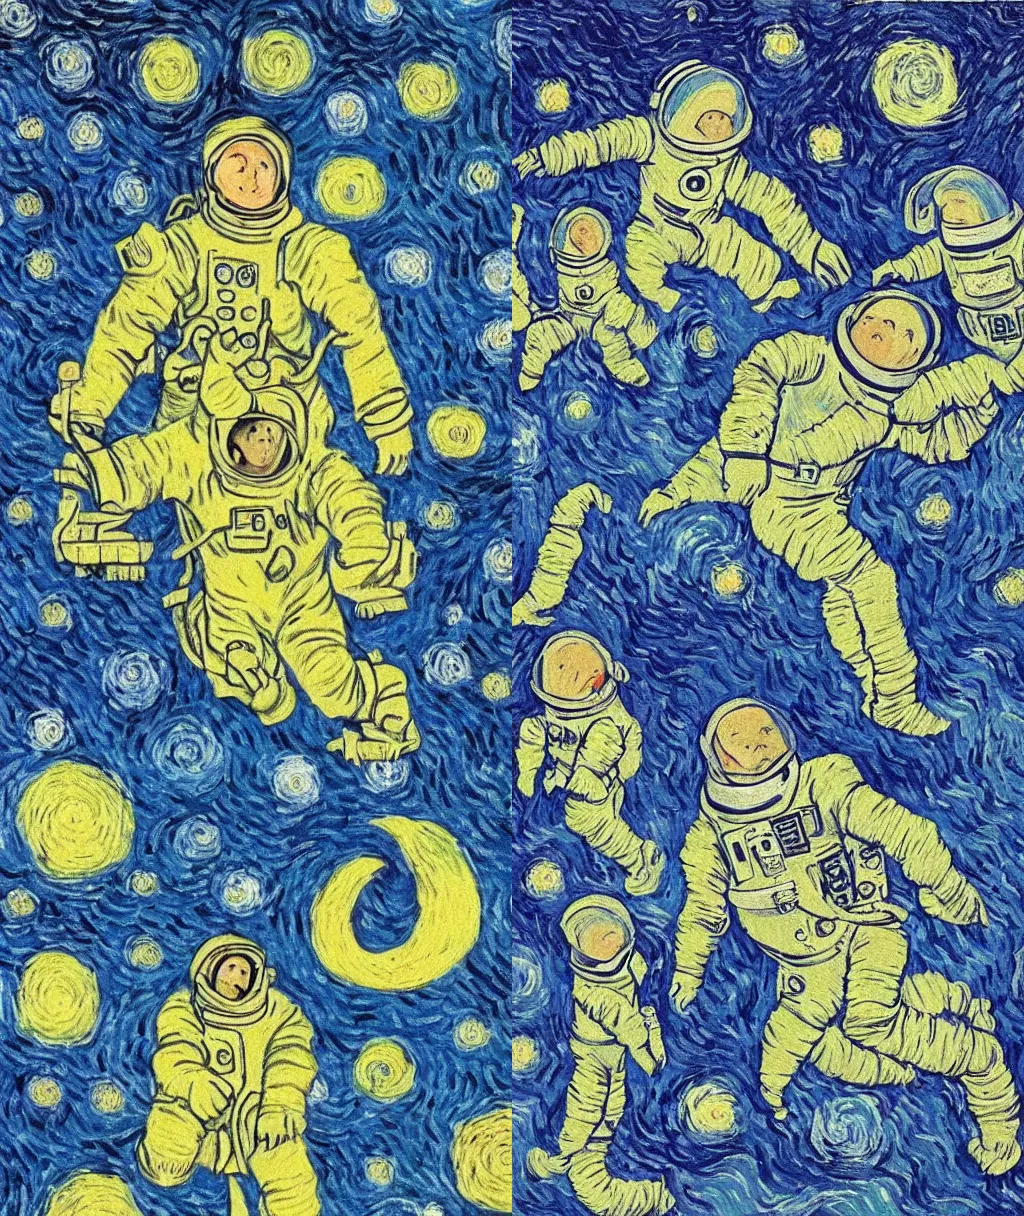 Prompt: Astronauts between the moon and the Earth, Van Gogh style.